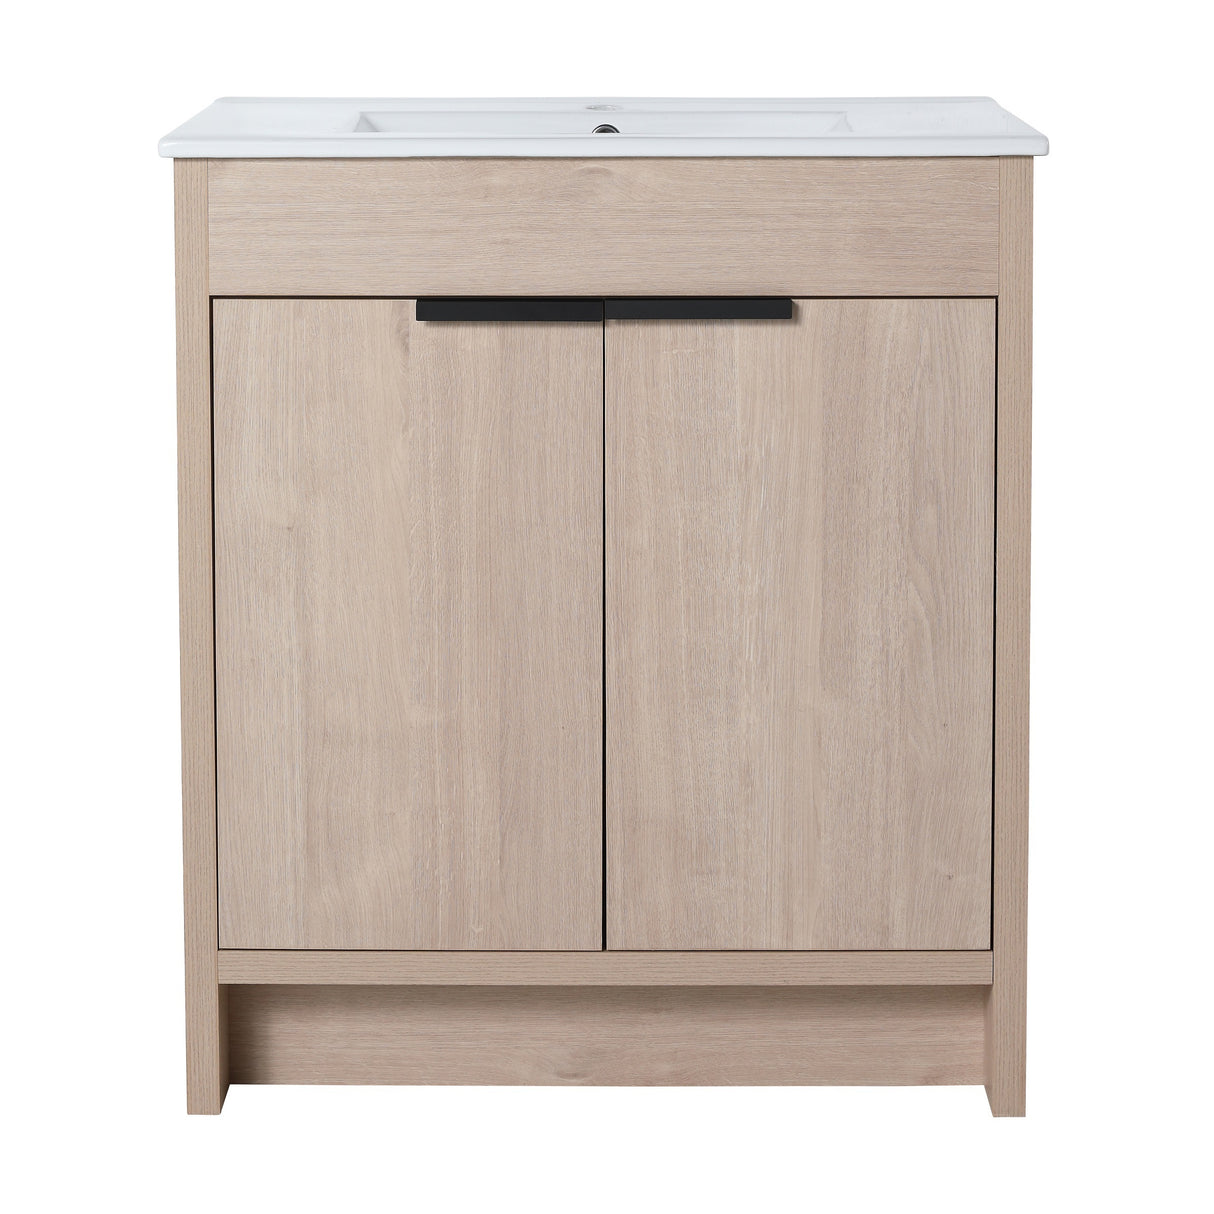 30 Inch Freestanding Bathroom Vanity with White Ceramic Sink & 2 Soft-Close Cabinet Doors (BVB02430PLO-G-BL9075B),W1286S00018